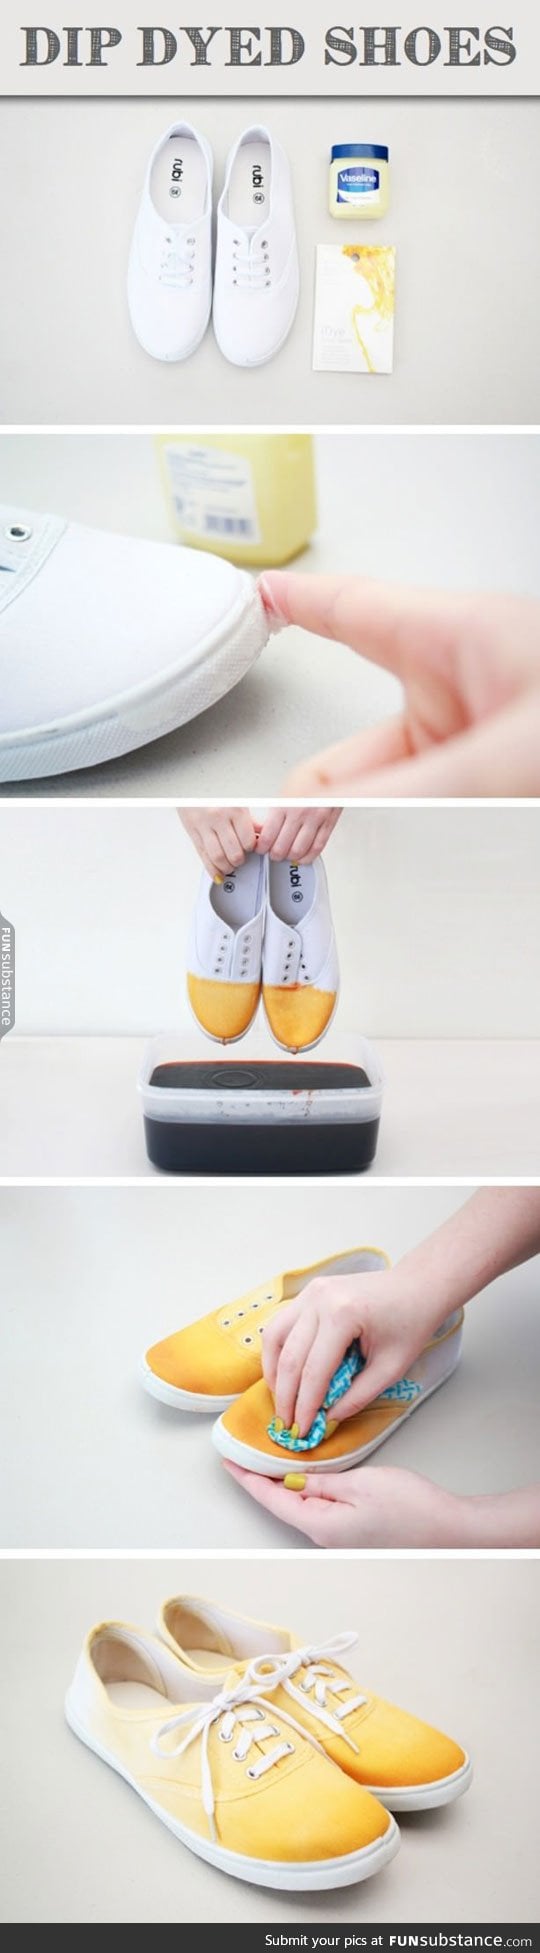 Something cool you can do with your shoes